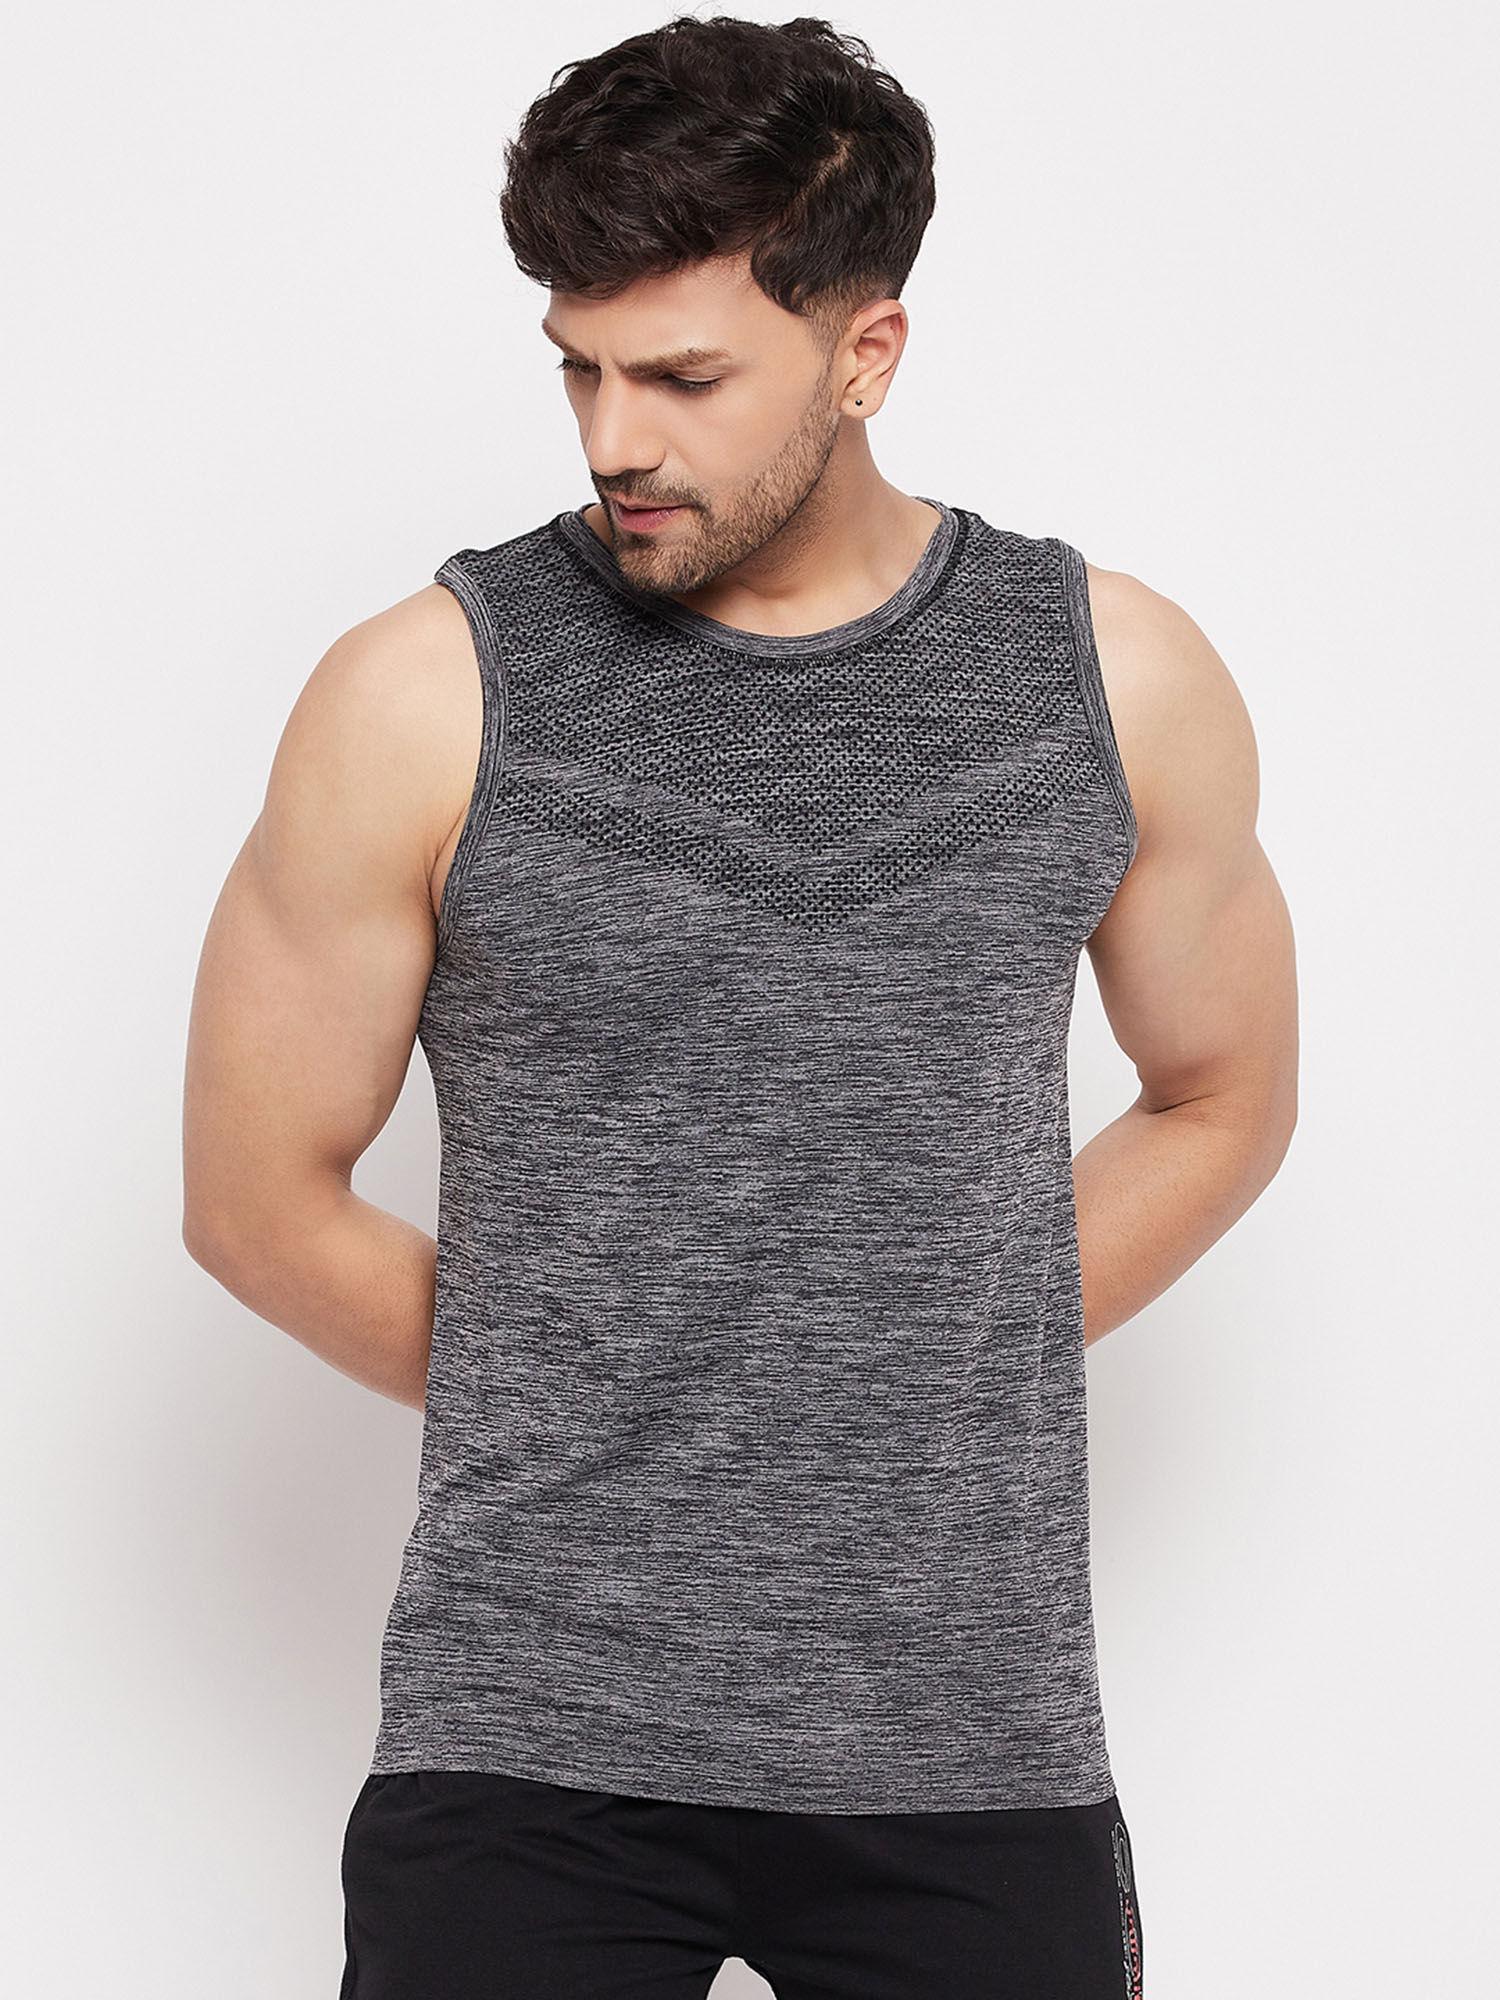 seamless men's sando vests with round neck and textured knit in anthra melange color